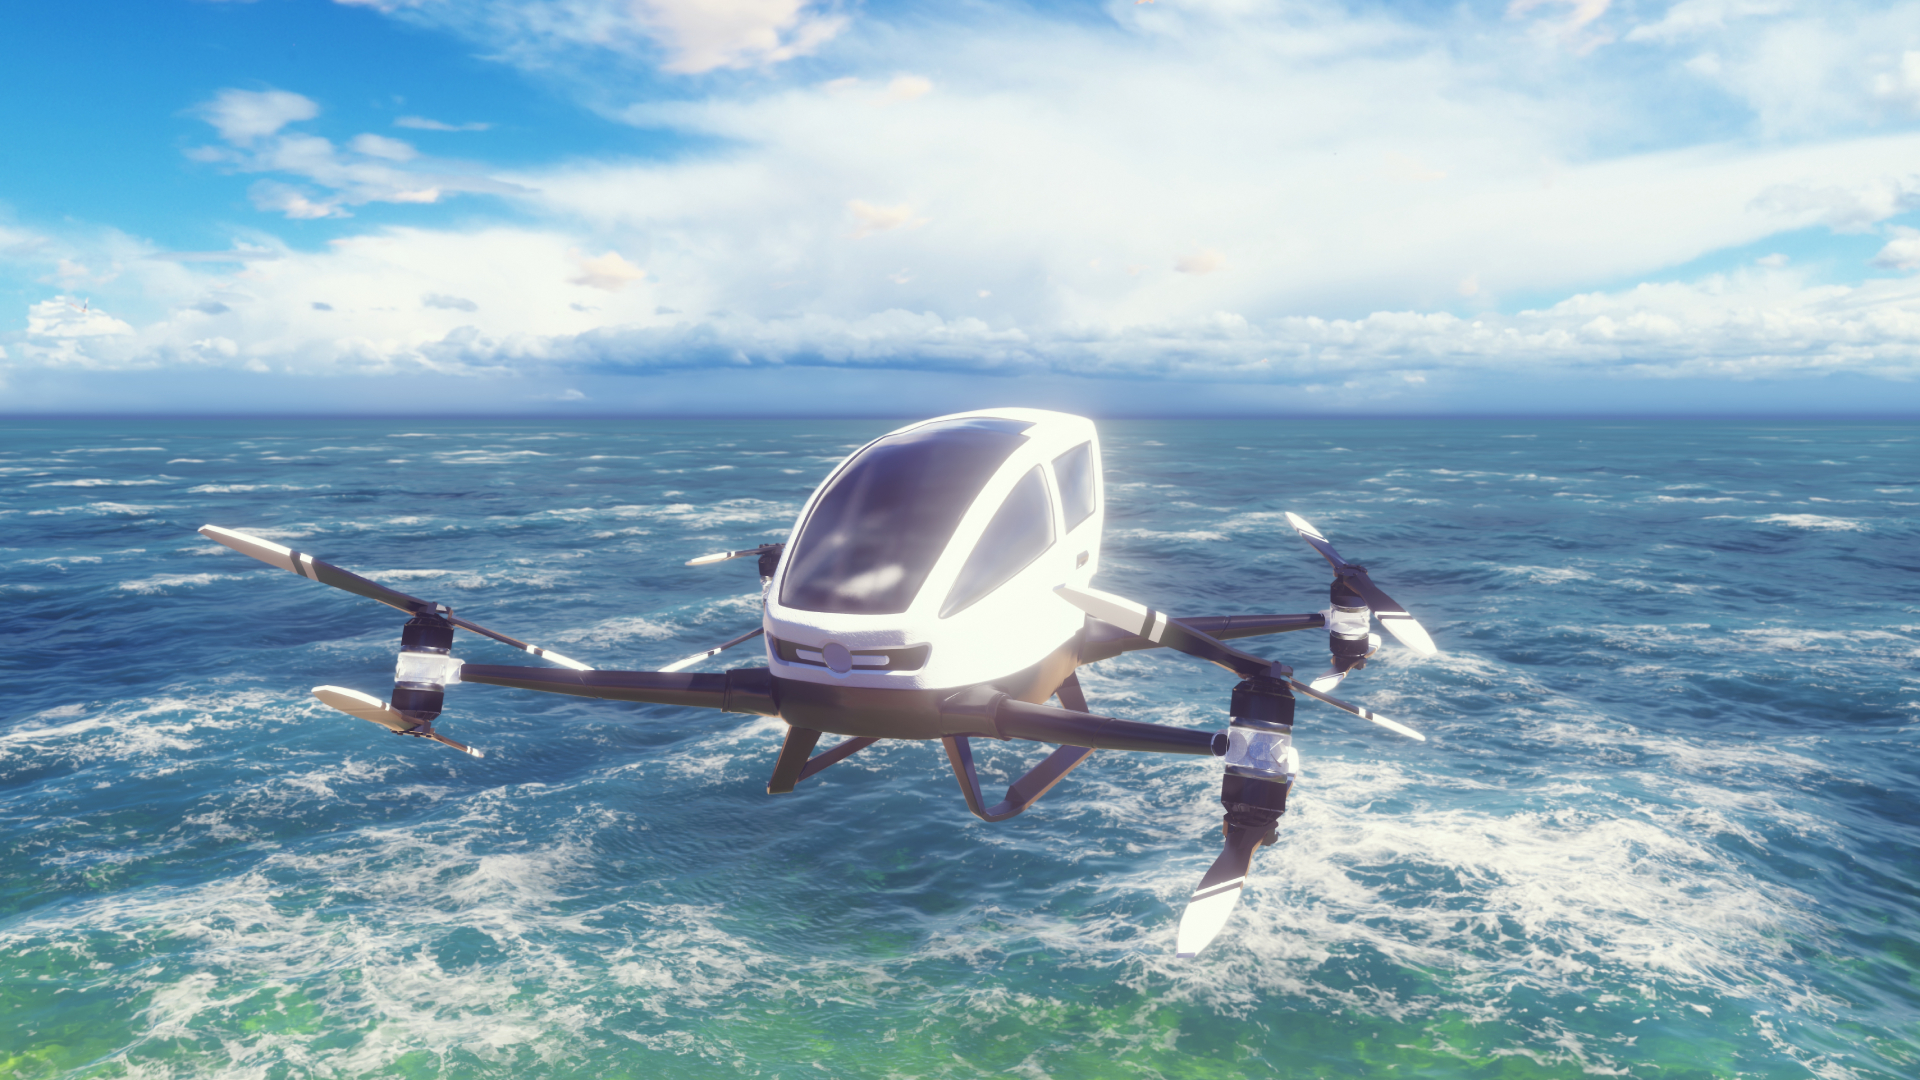 Trends in eVTOL development result in exciting new aircraft, like this eVTOL flying over the ocean with blue sky and white clouds in the background